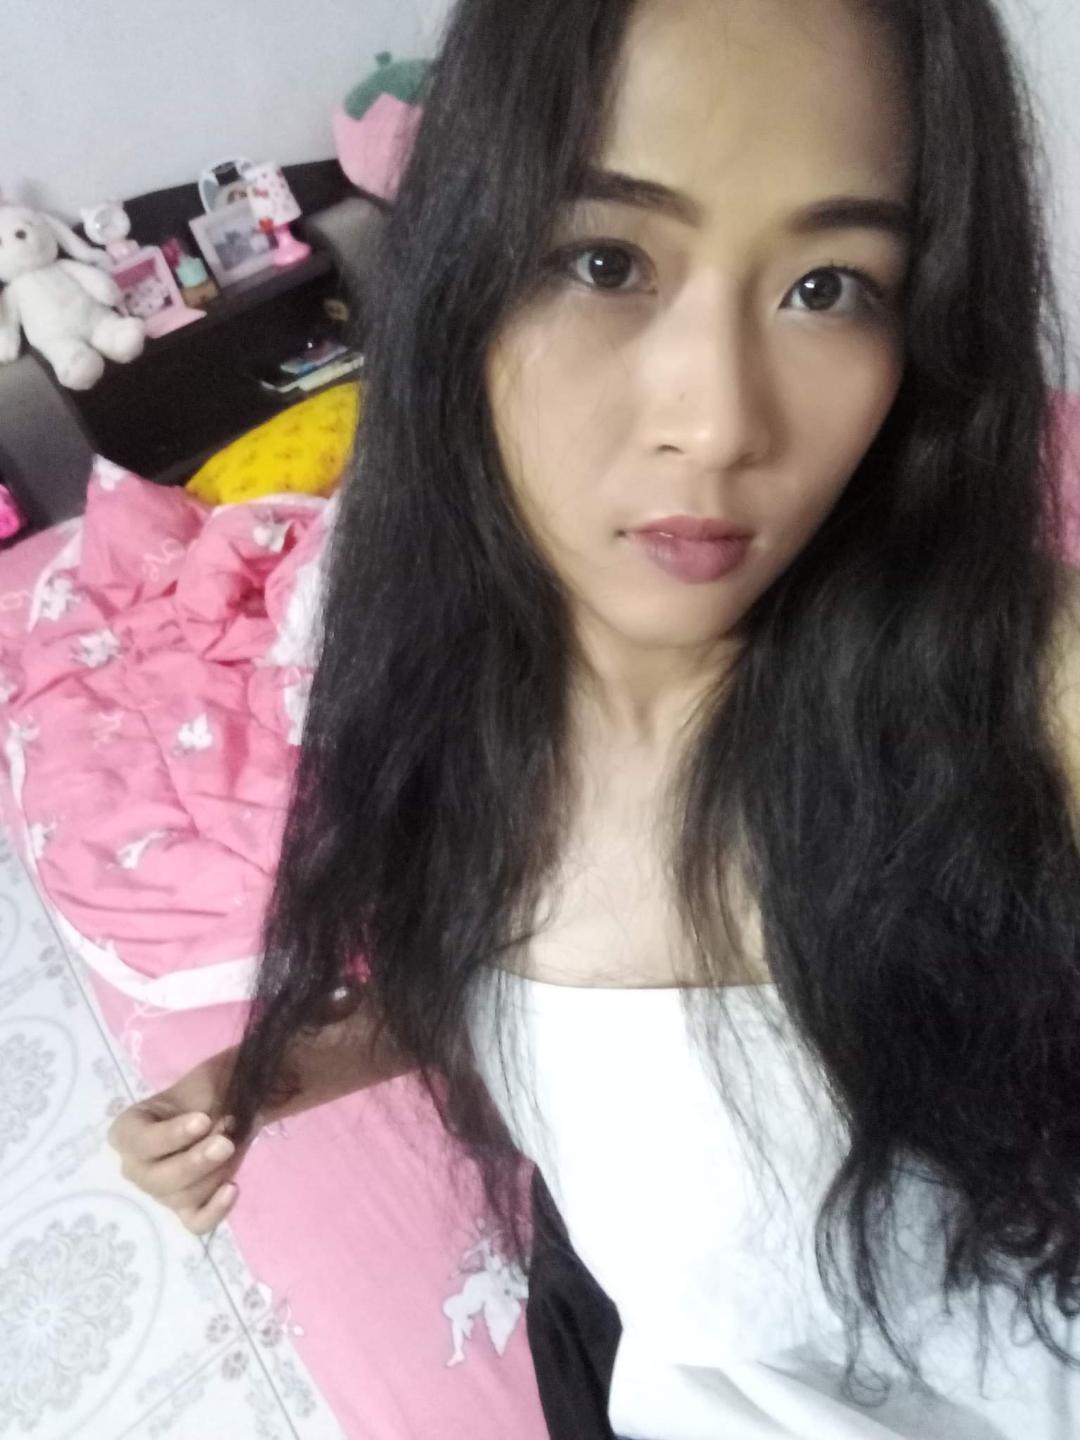 Who Wants To Cum On My Asian Girl S Face Pic Let Us See Your Cum On Her Scrolller